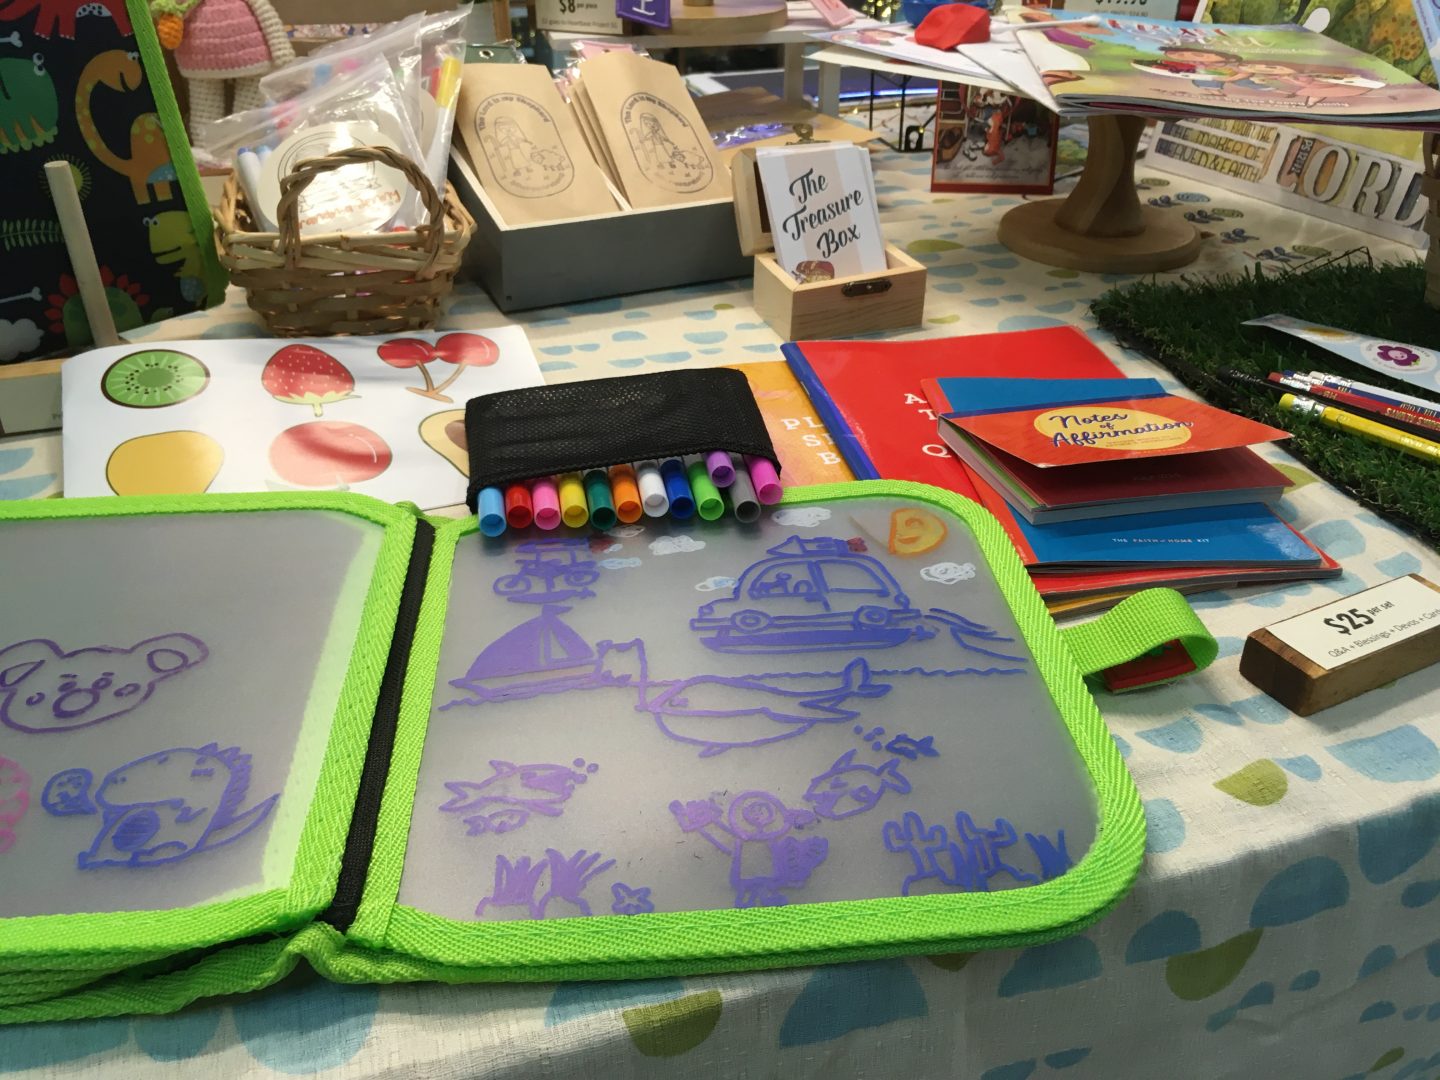 Grandma Jenny Shop sells her environmentally-friendly and device-free doodle books along with other children's toys and devotional matrials from The Treasure Box Singapore. It will also be the pick-up location for the two shops' online orders.